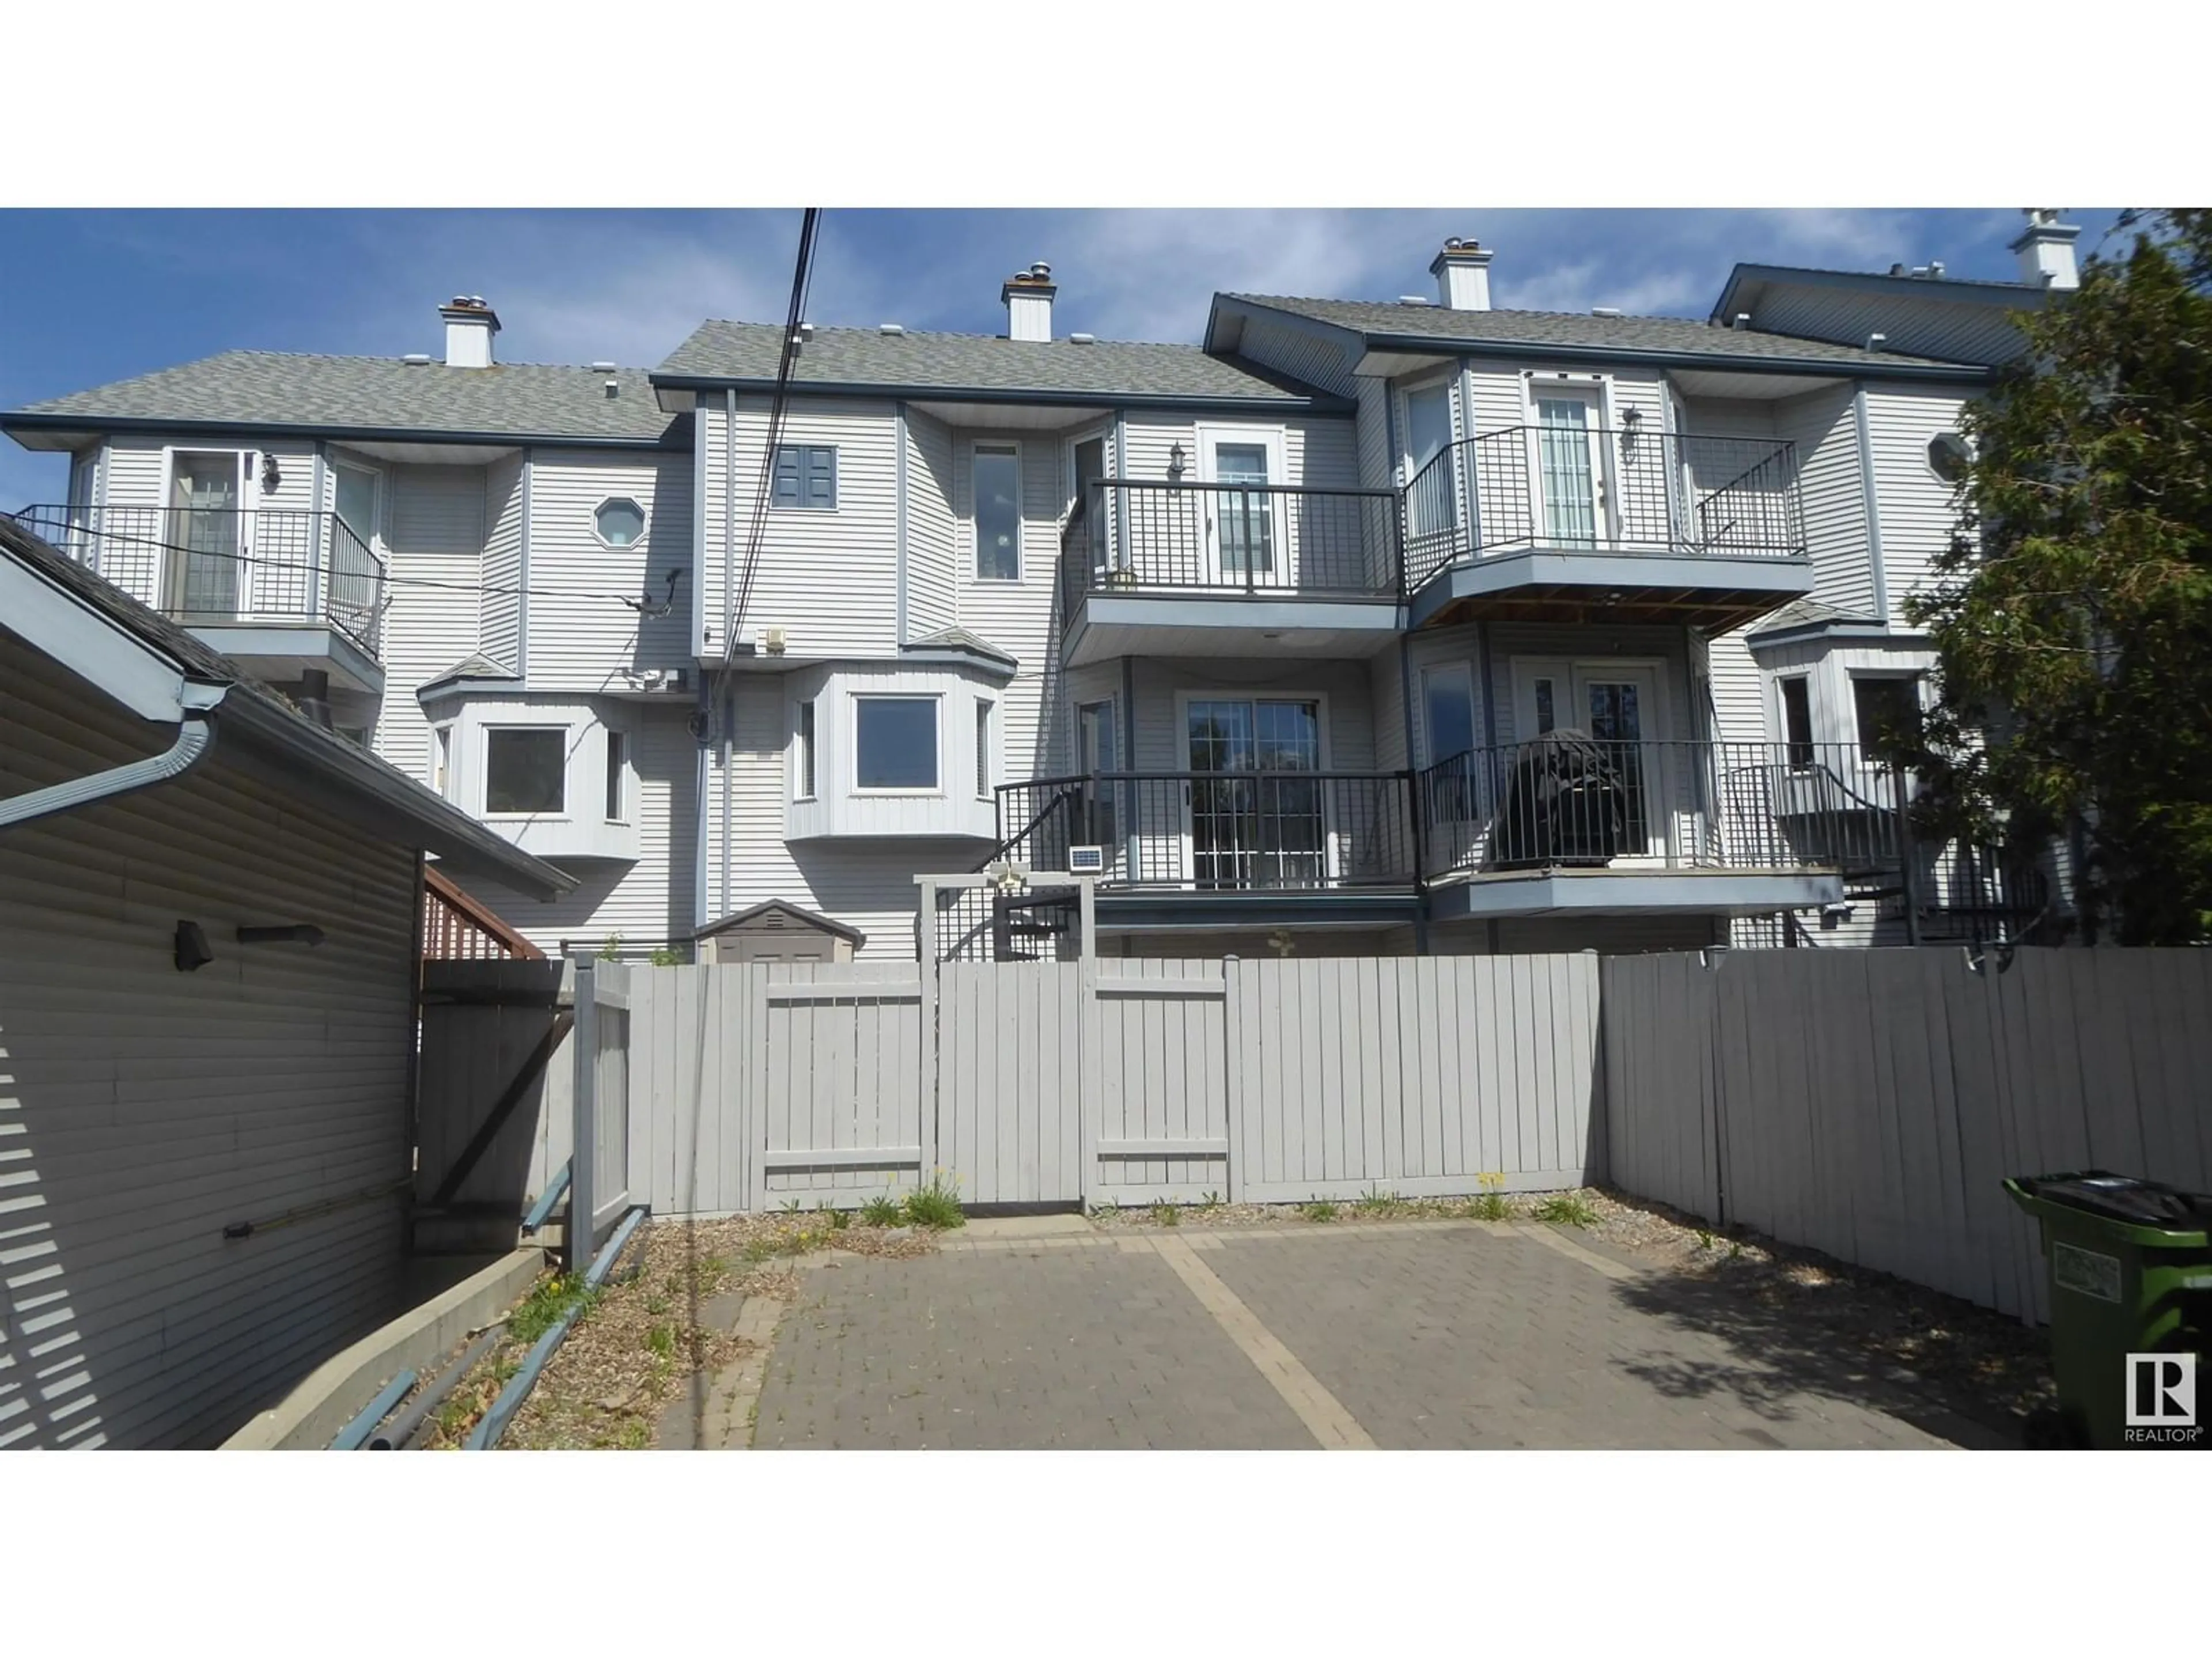 A pic from exterior of the house or condo for #3 11105 UNIVERSITY AV NW, Edmonton Alberta T6G1Y5